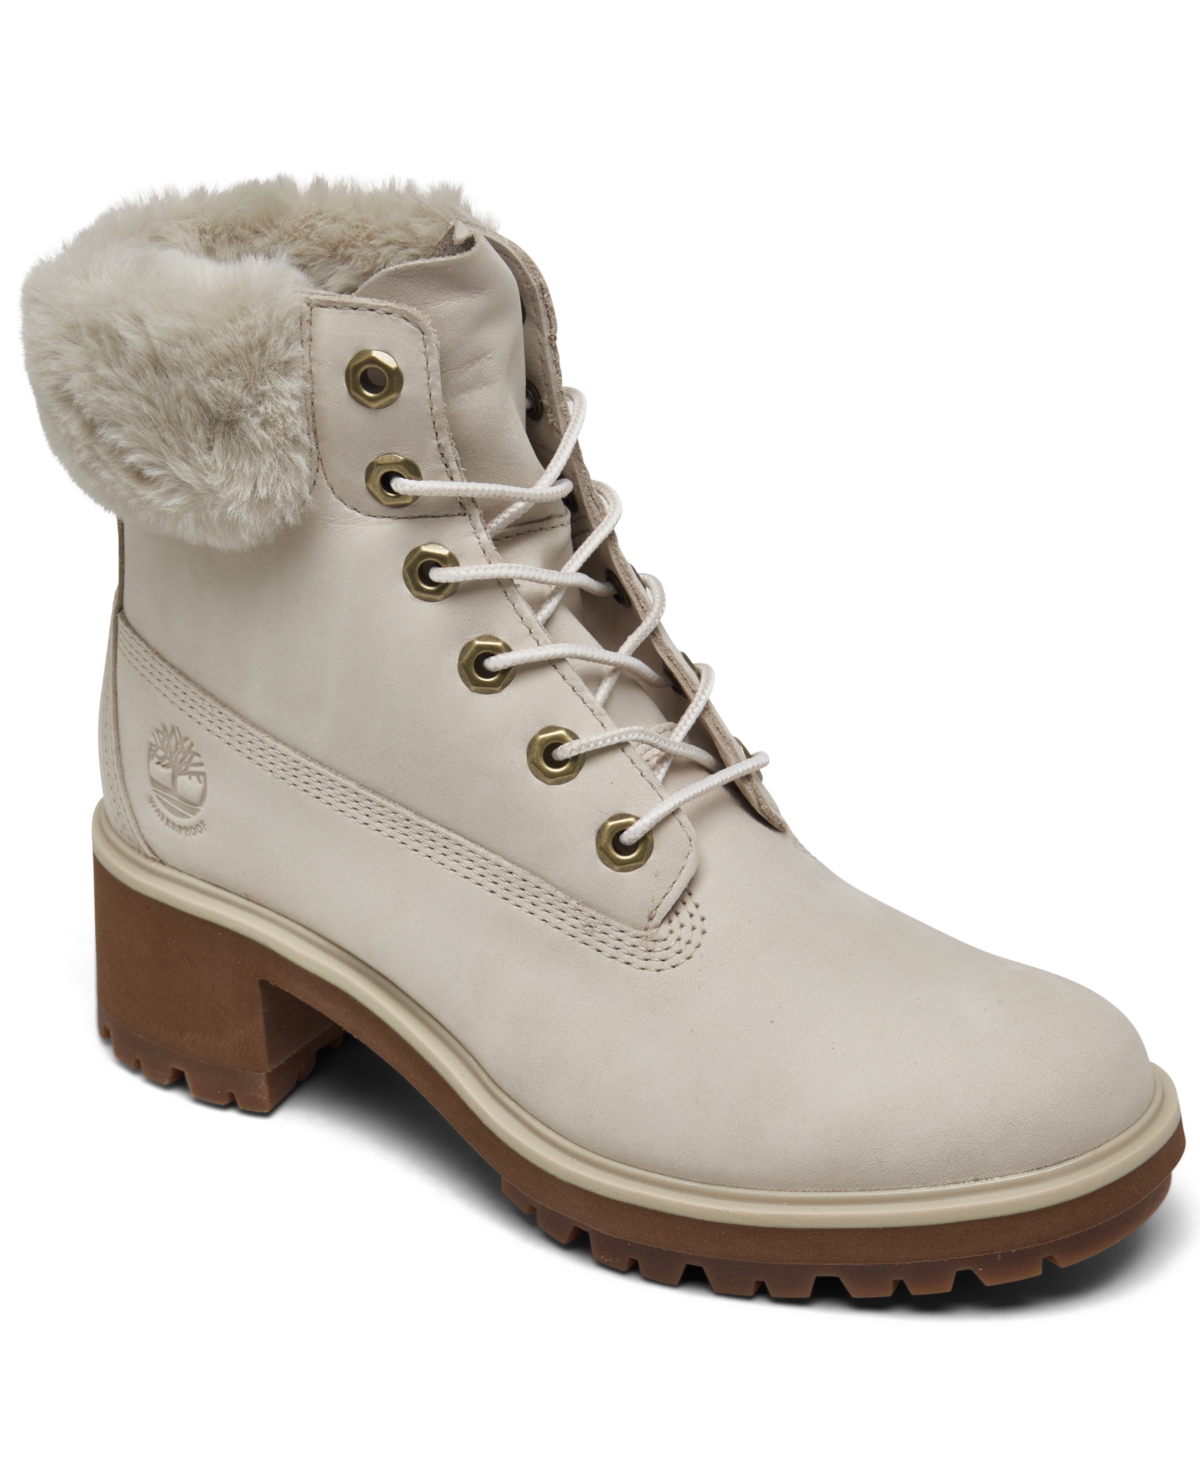 Timberland Women's Kinsley 6" Water-resistance Boots From Finish Line In Rainy Day